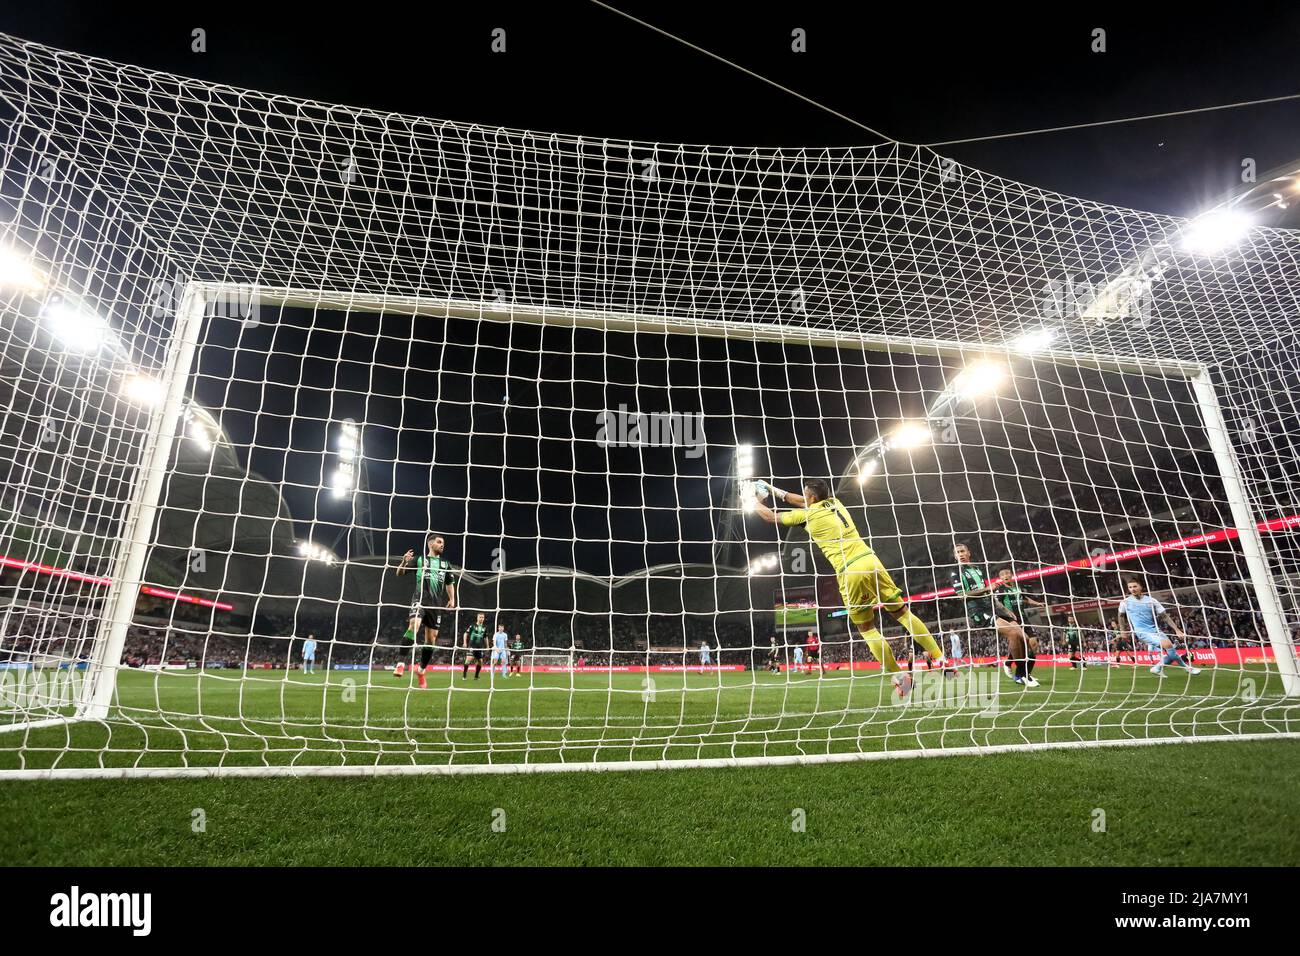 Melbourne, Australia, 28 May, 2022. Jamie Young of Western United catches the ball during the A-League Grand Final soccer match between Melbourne City FC and Western United at AAMI Park on May 28, 2022 in Melbourne, Australia. Credit: Dave Hewison/Speed Media/Alamy Live News Stock Photo